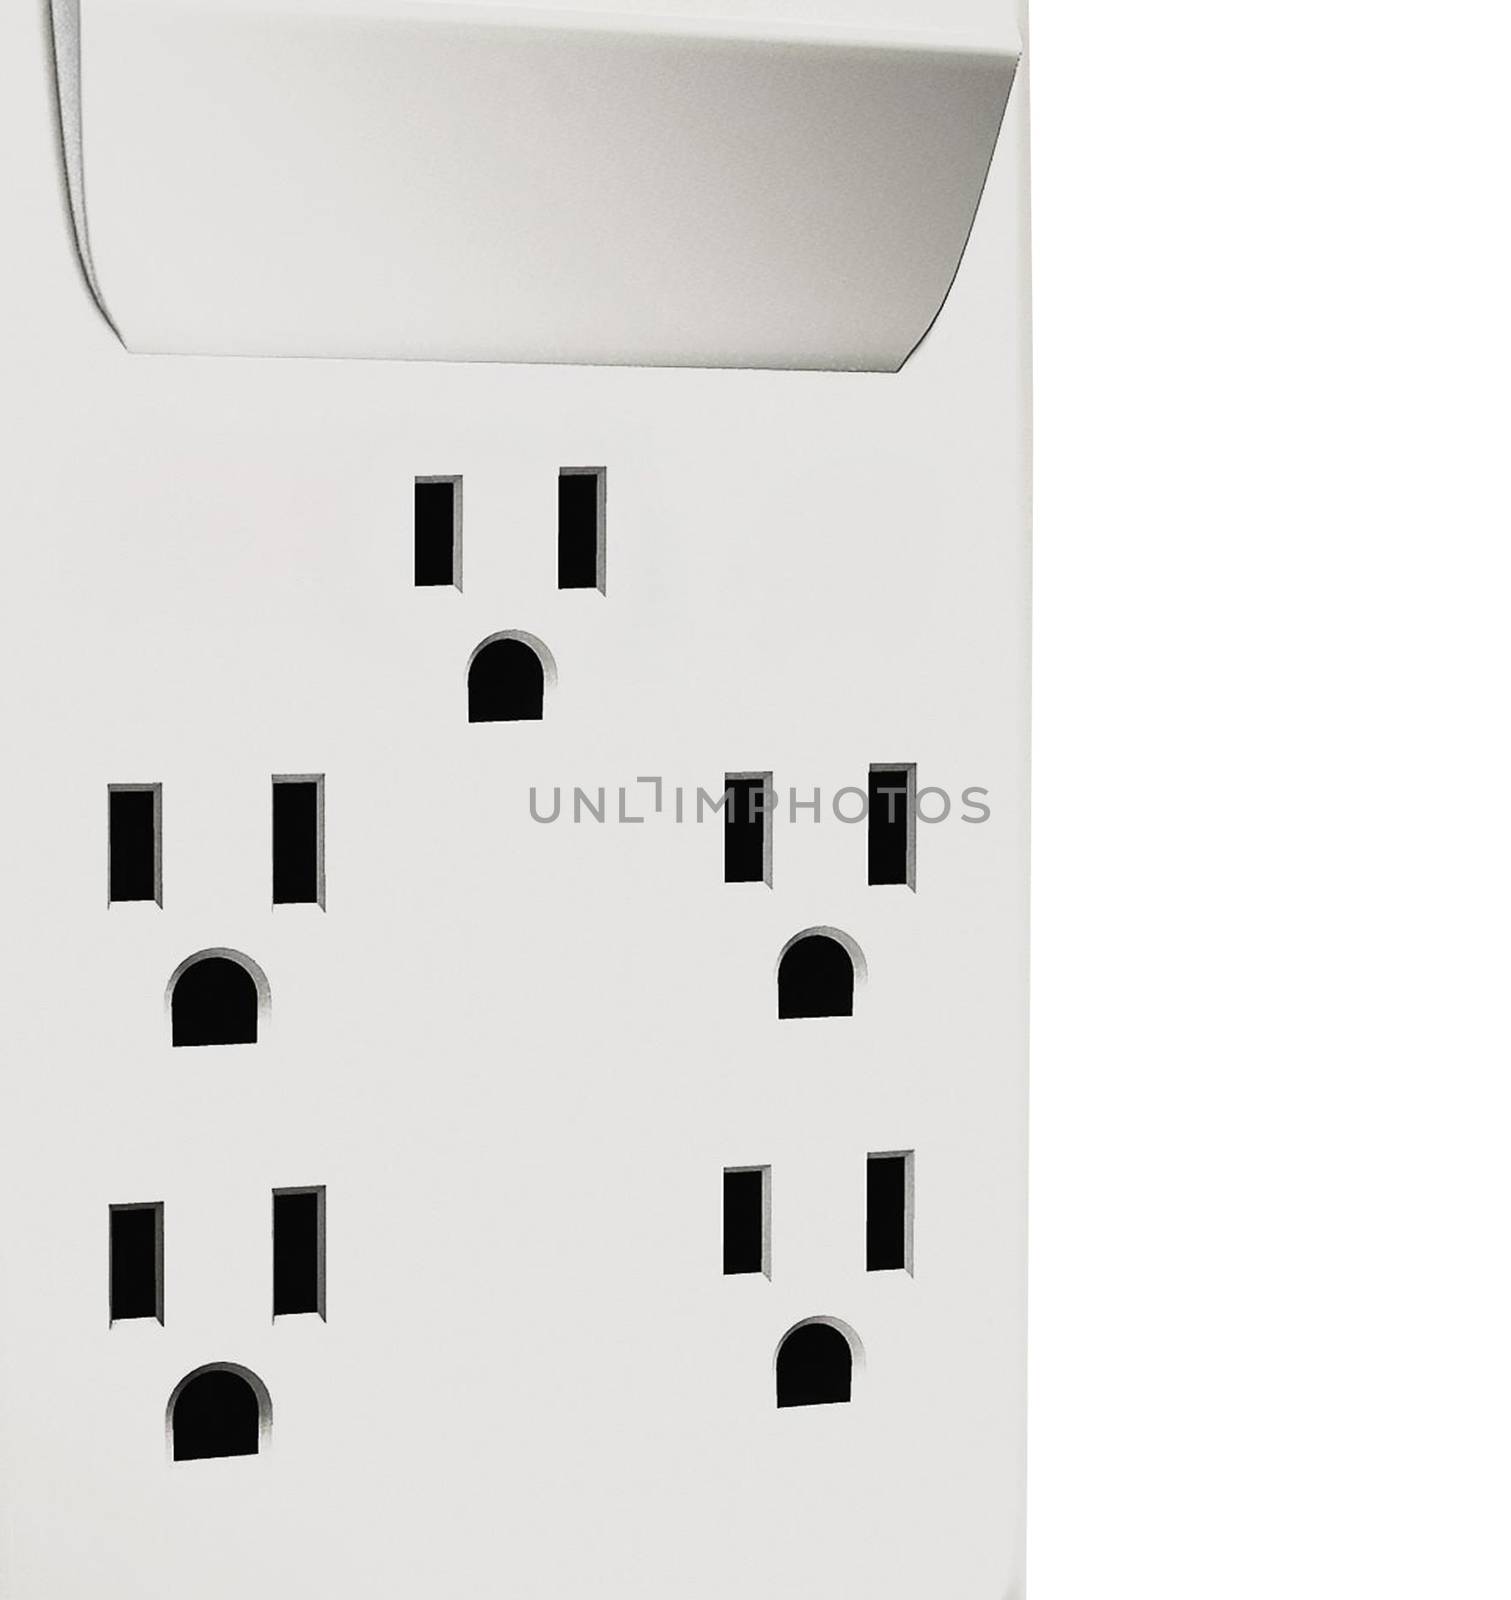 multiple electric socket adapter